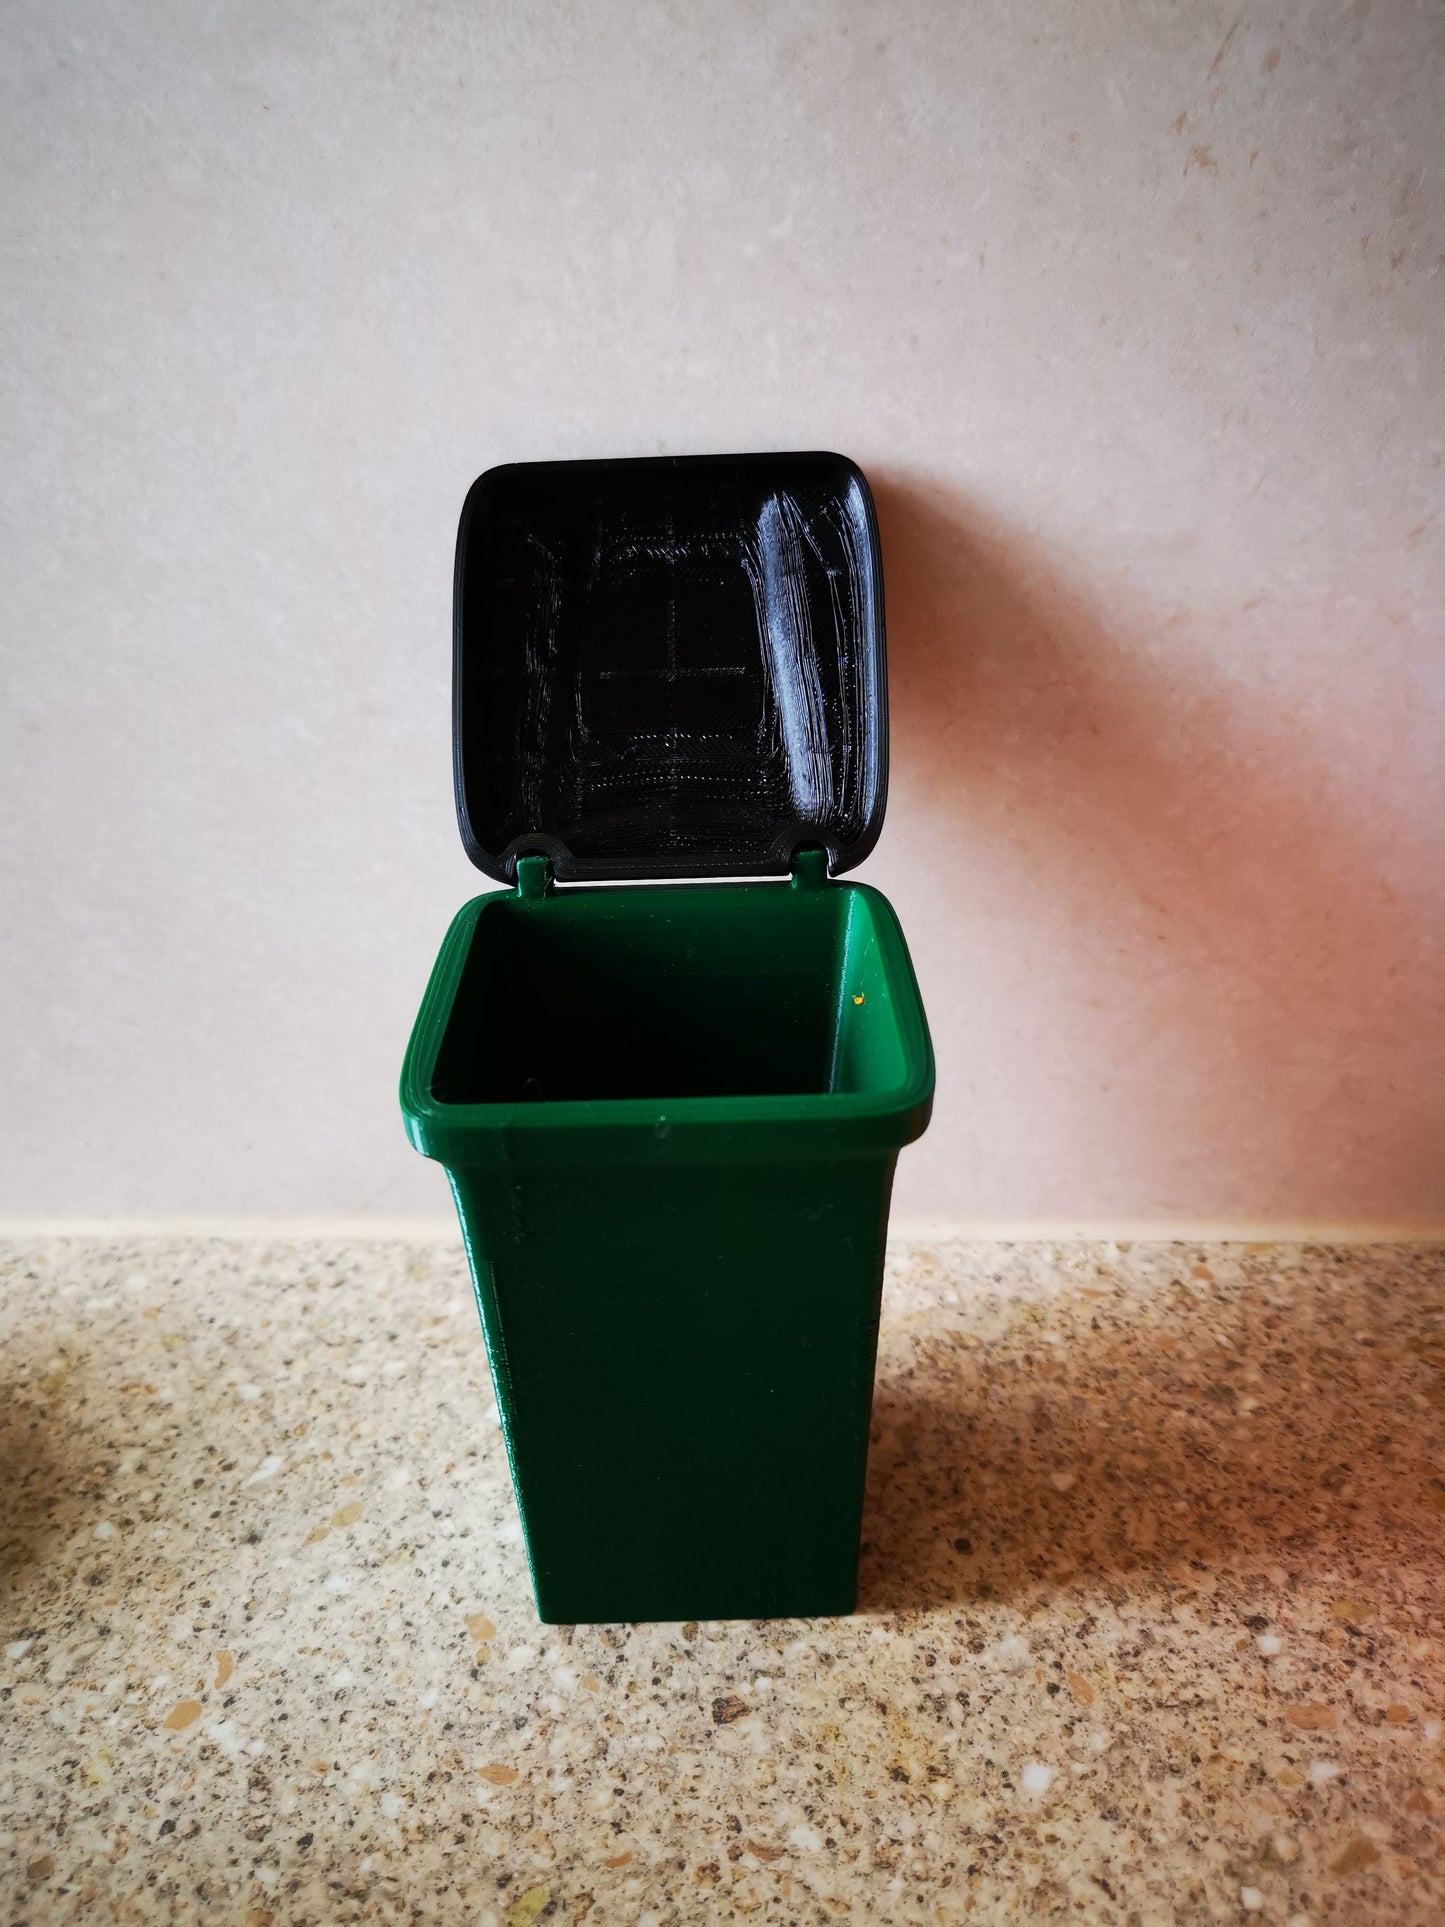 3D printed waste bin trash can from front with lid open